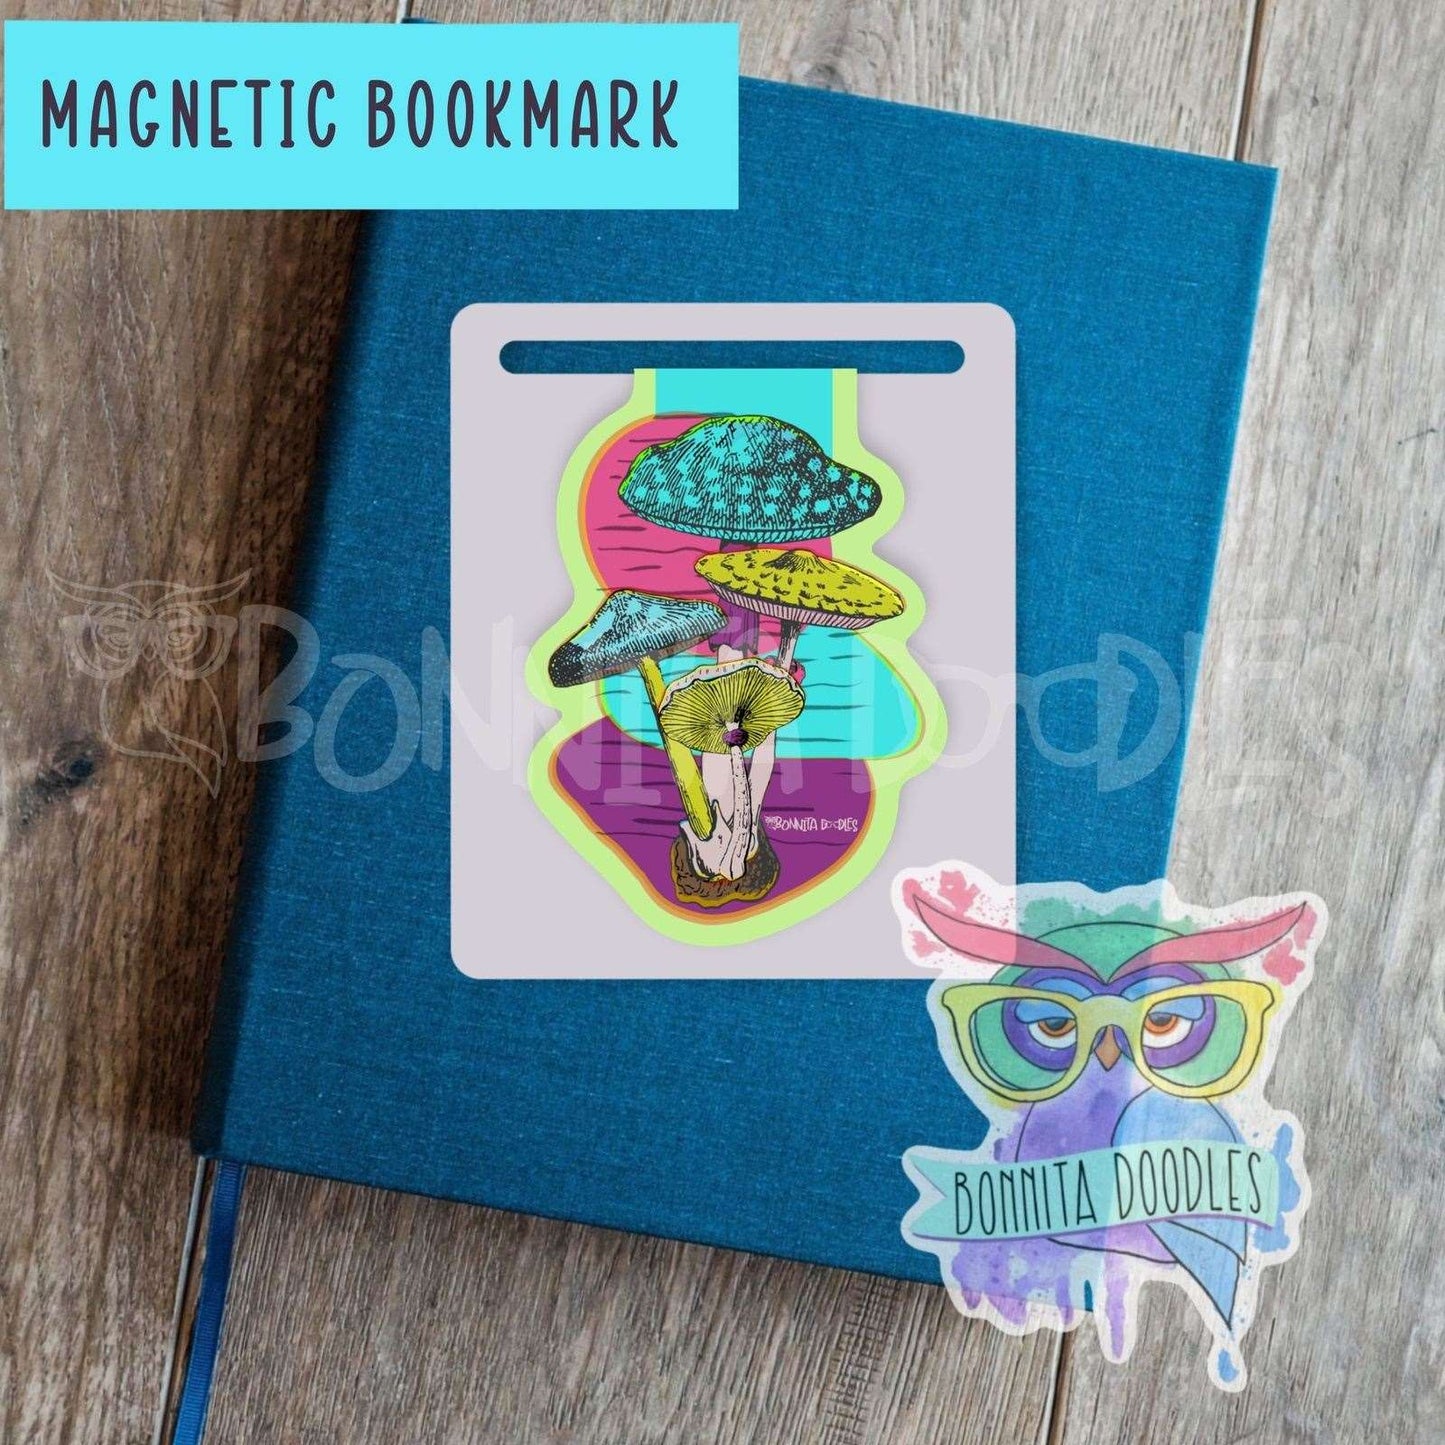 Mushrooms vintage magnetic bookmark - the perfect gift